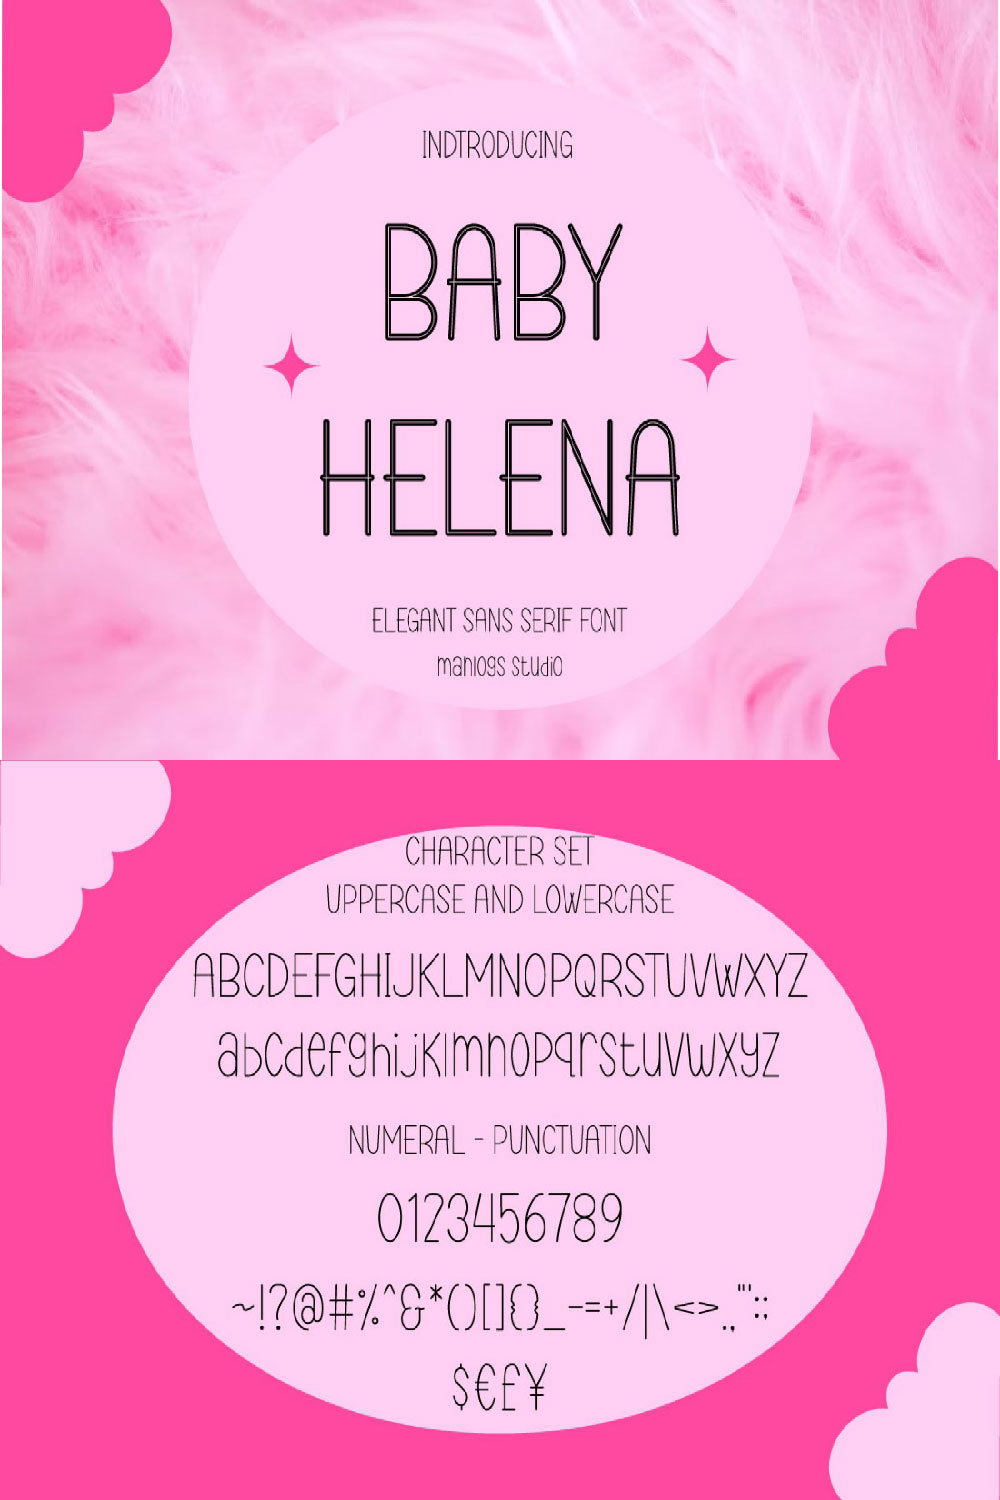 Baby Helena pinterest preview image.